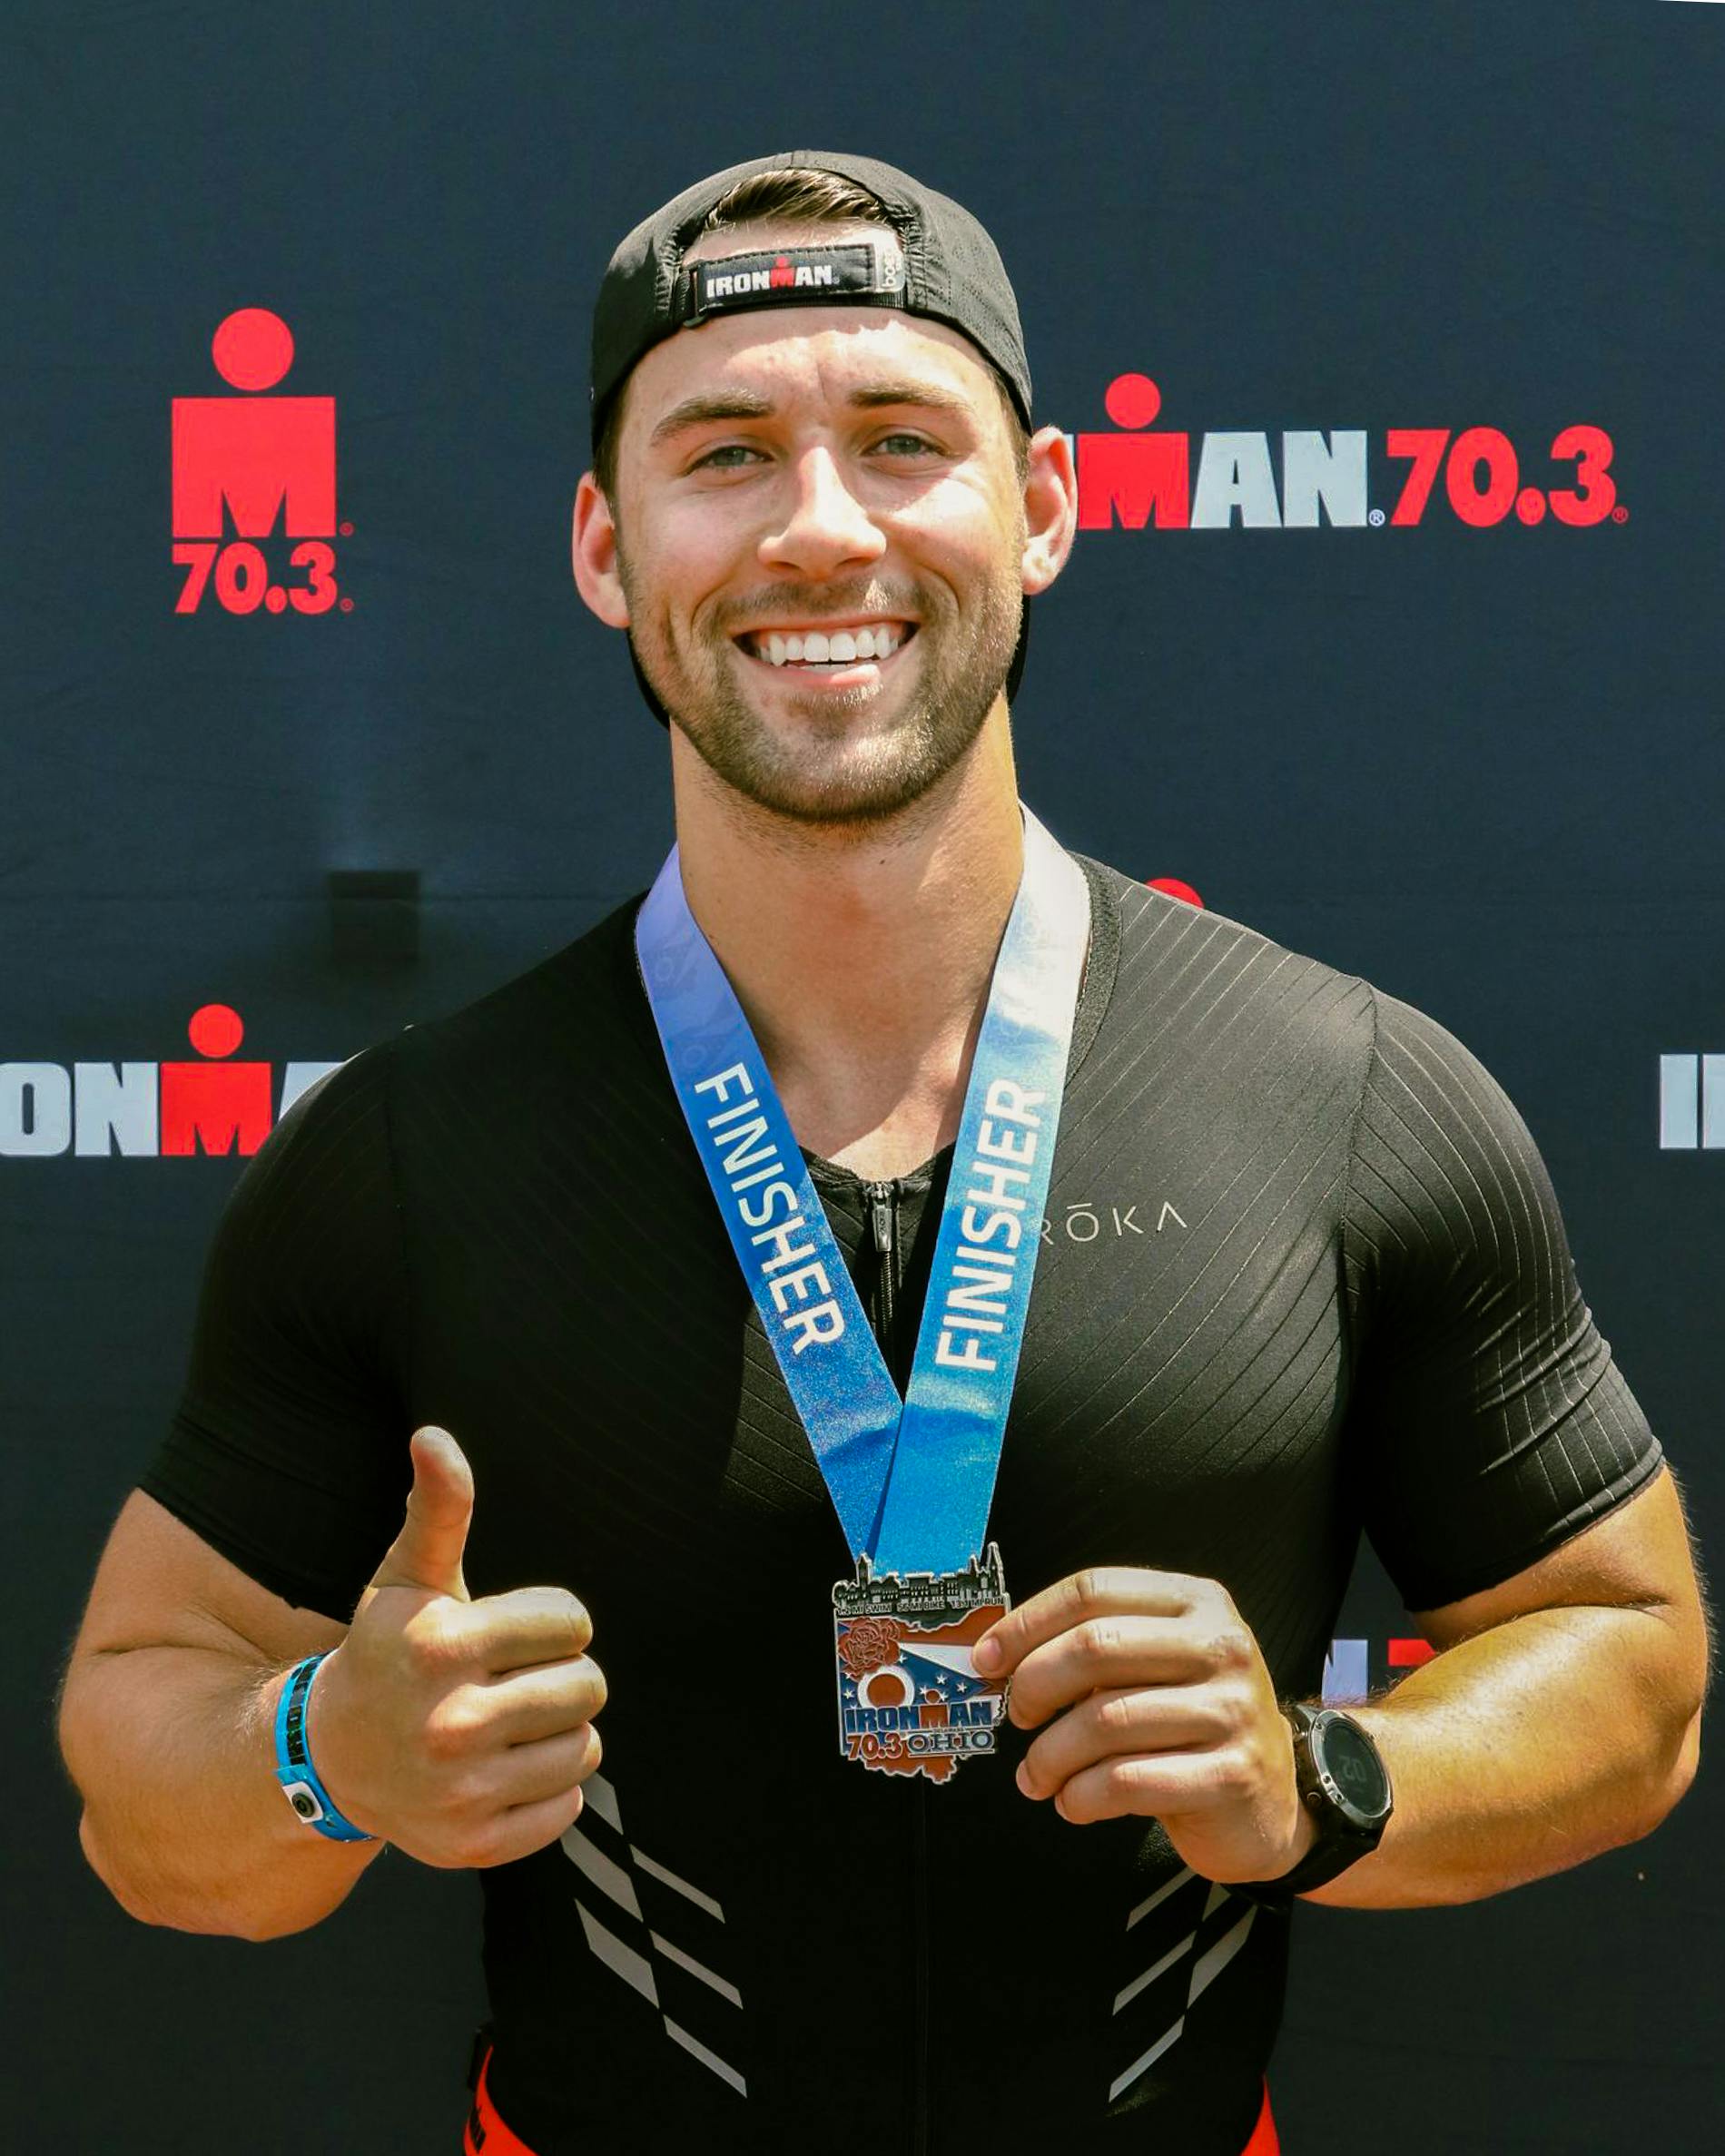 I Did A Half Ironman With Zero Training And Here's What Happened - Ironman Ohio 70.3 Race Report